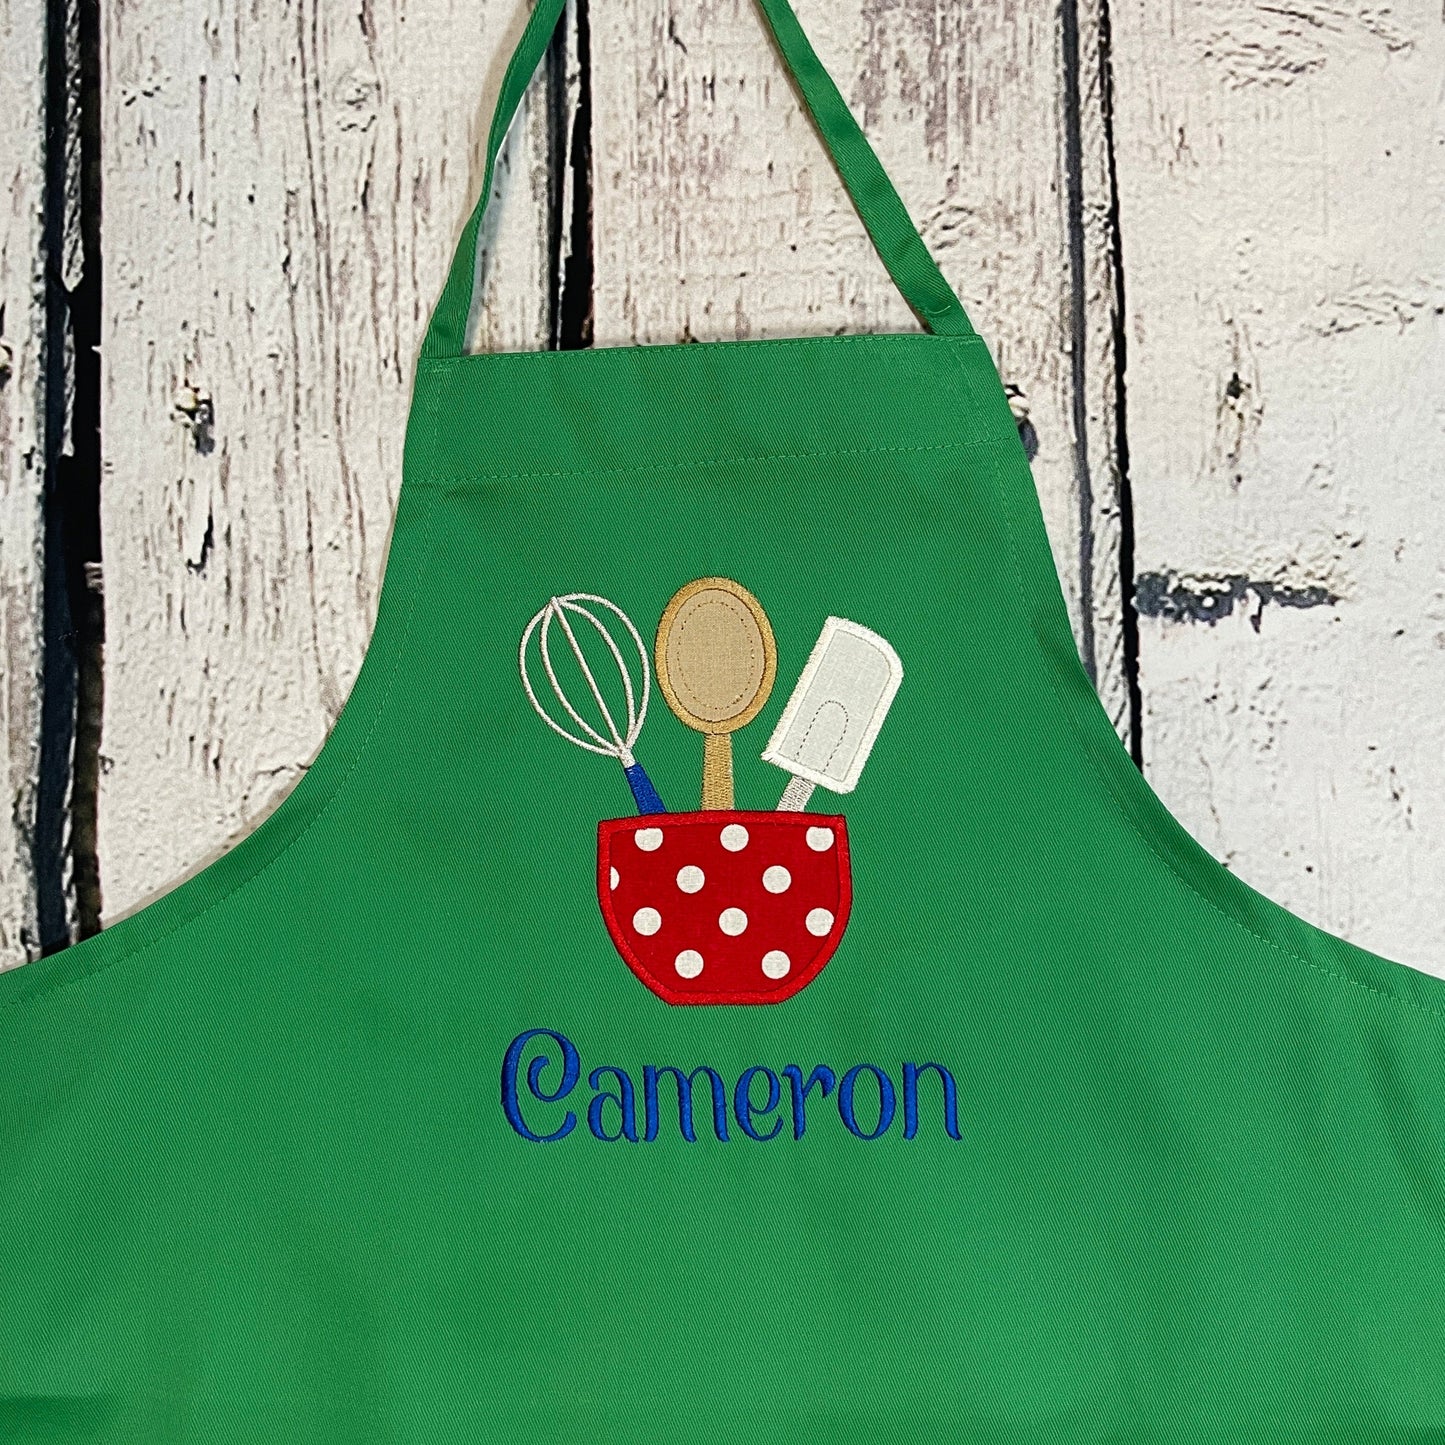 Kids Personalized Apron with Mixing Bowl & Utensil Design with Optional Chef hat & Spatula